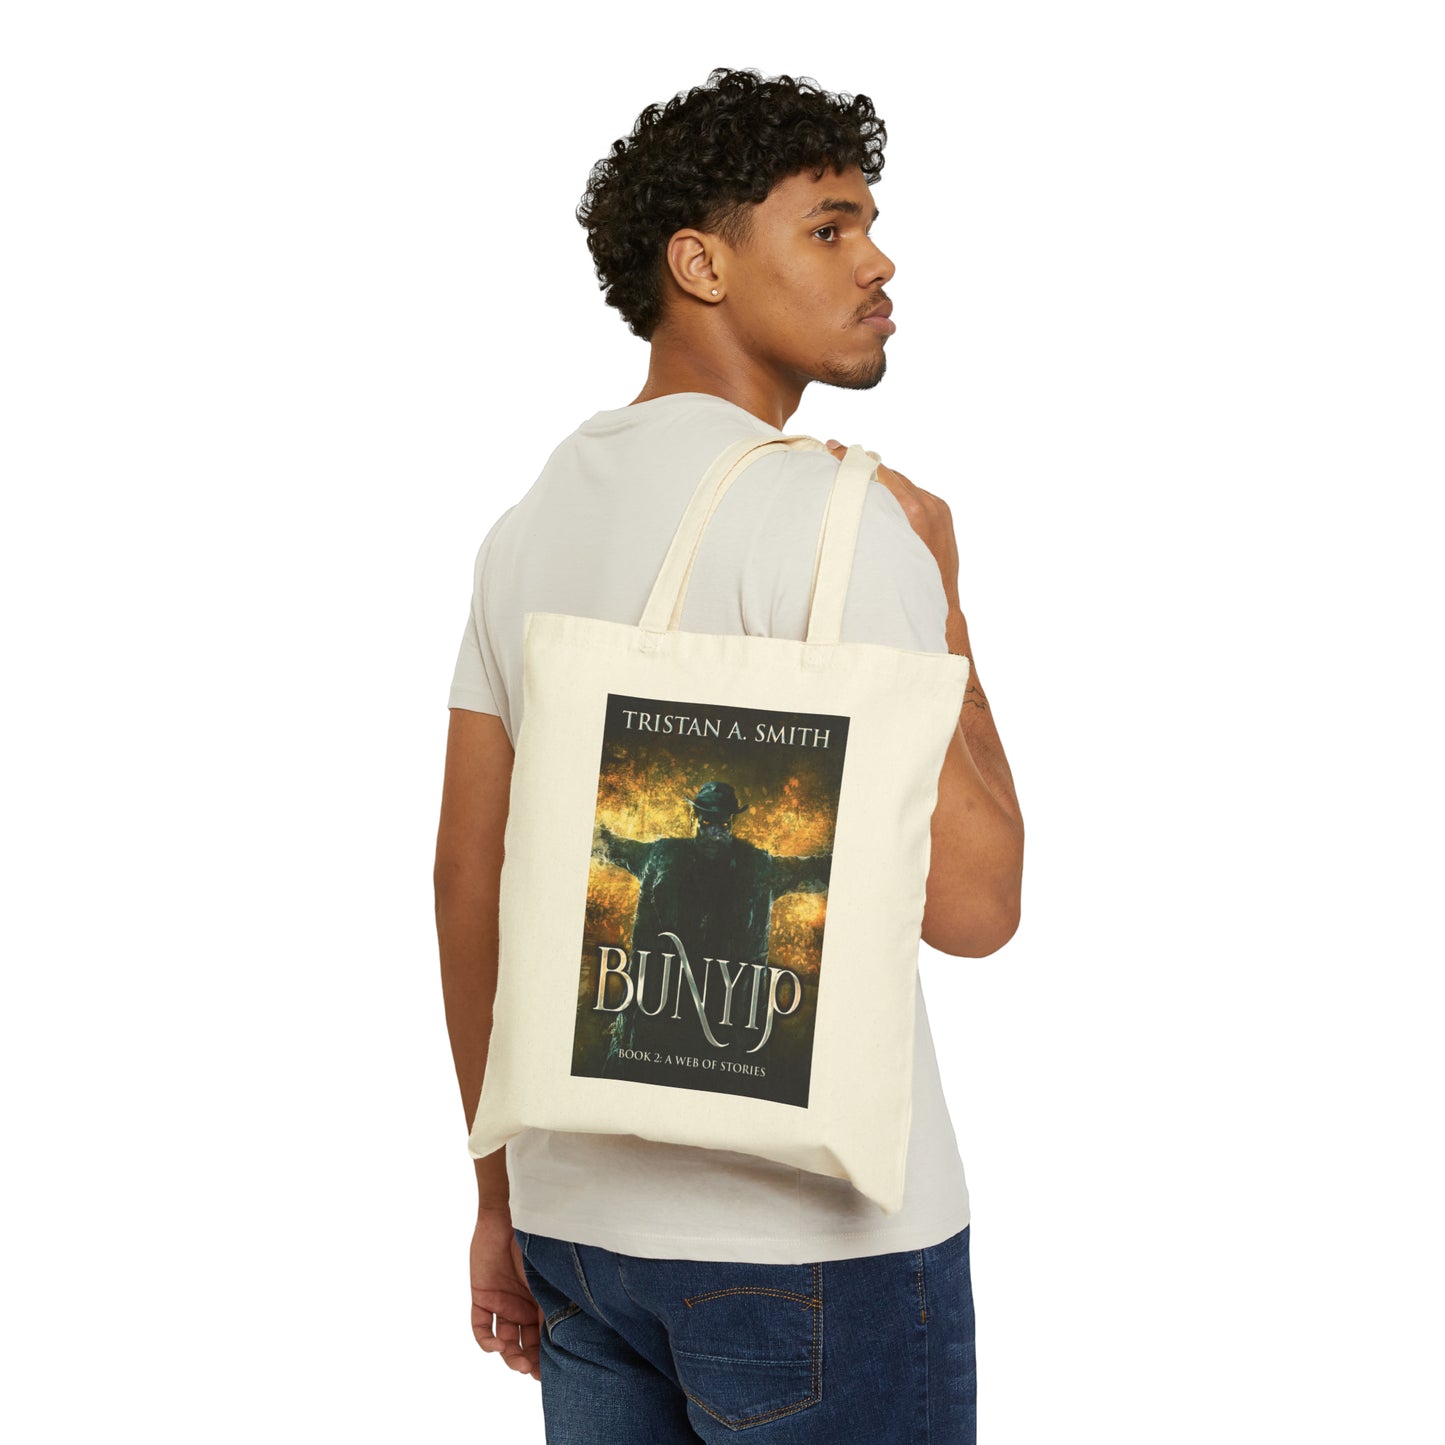 A Web Of Stories - Cotton Canvas Tote Bag